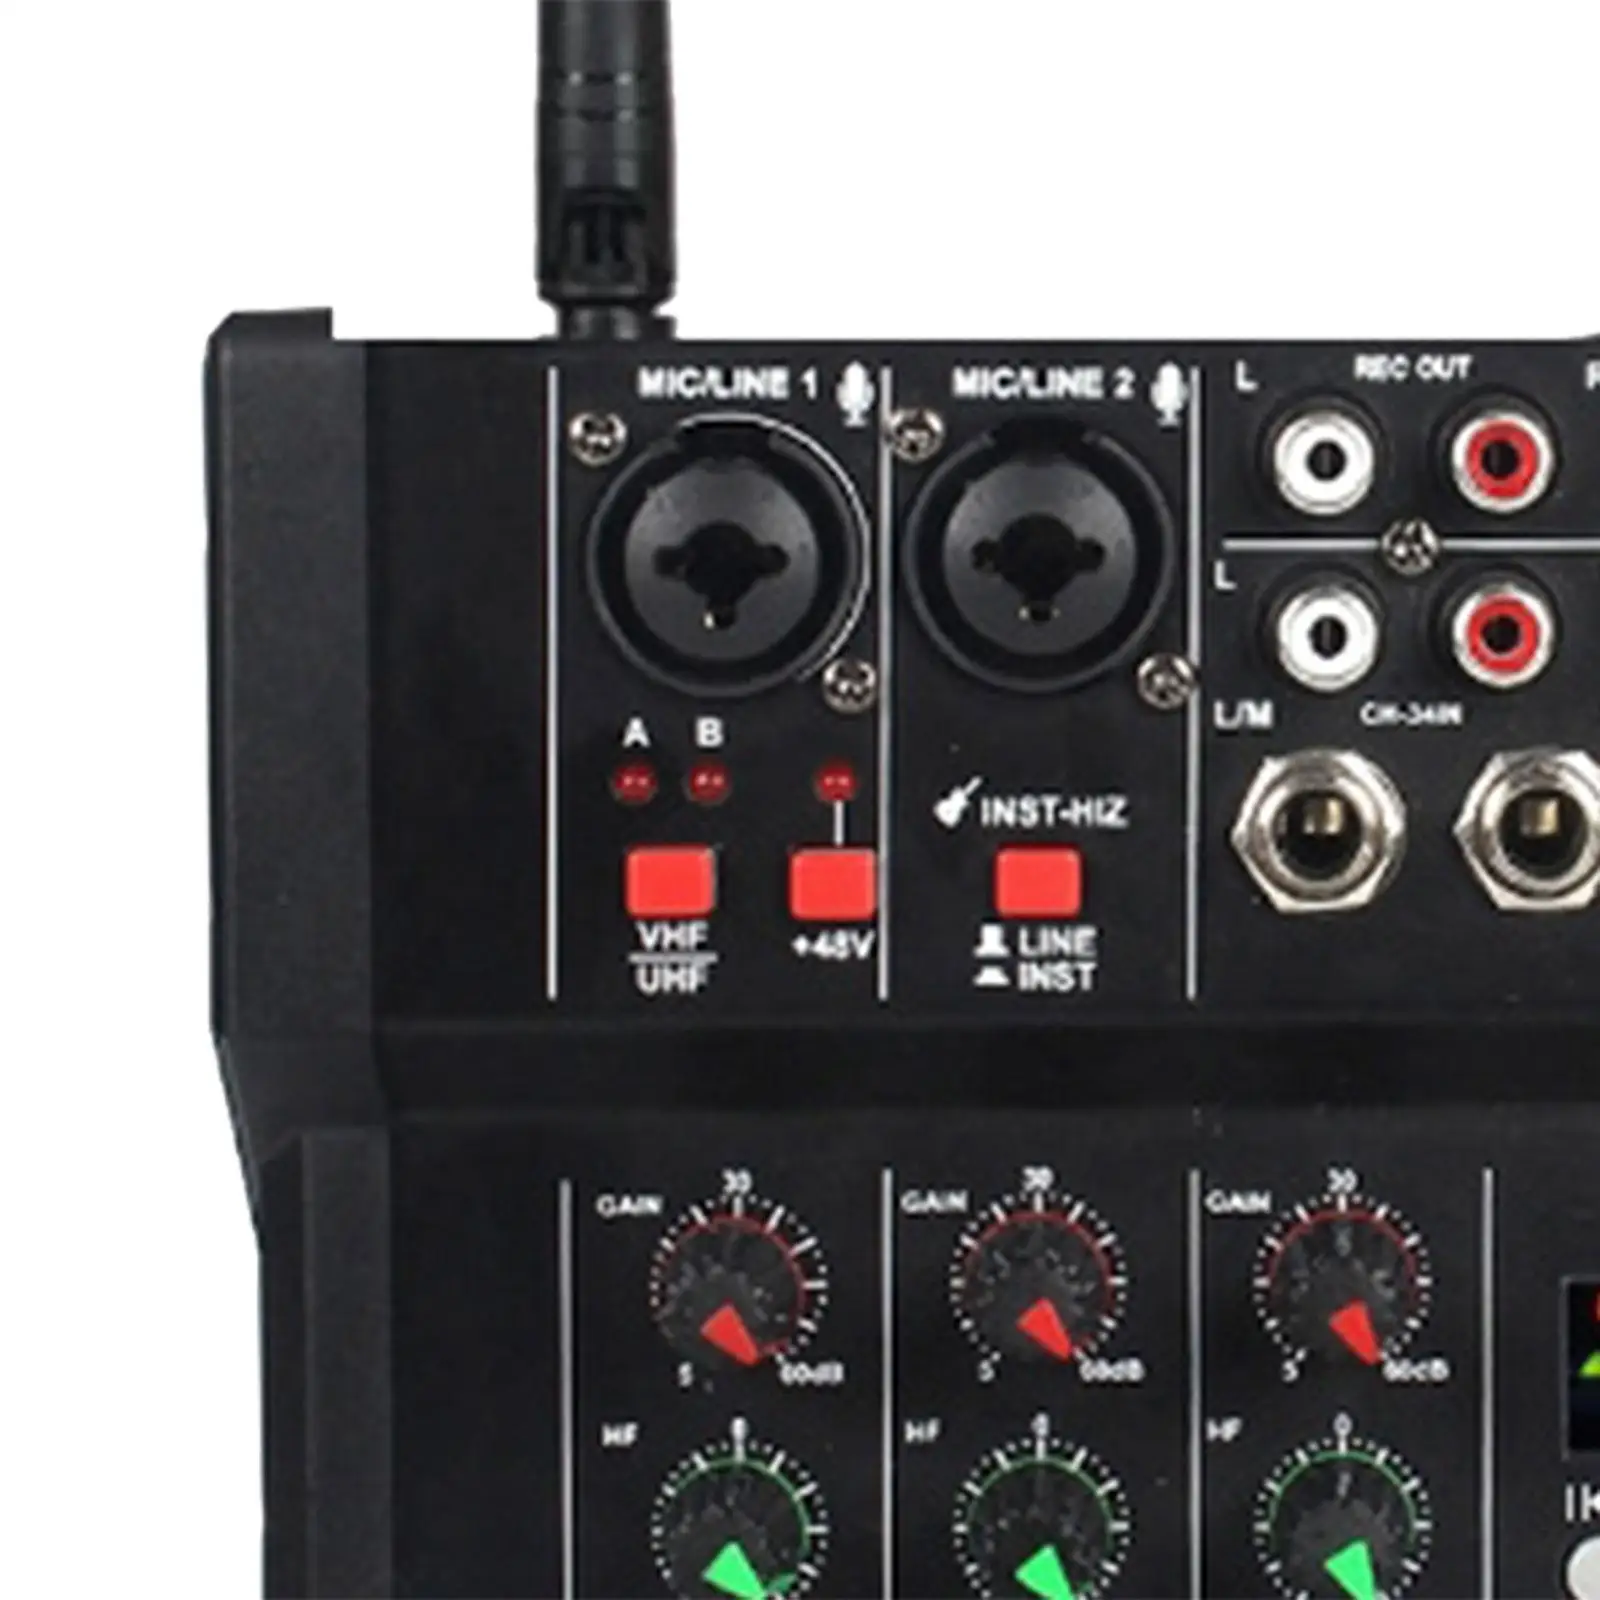 Audio Mixer with Dual Wireless Mic USB MP3 Bluetooth Sound Mixer Sound Mixing Console for Party Home Karaoke Studio Recording